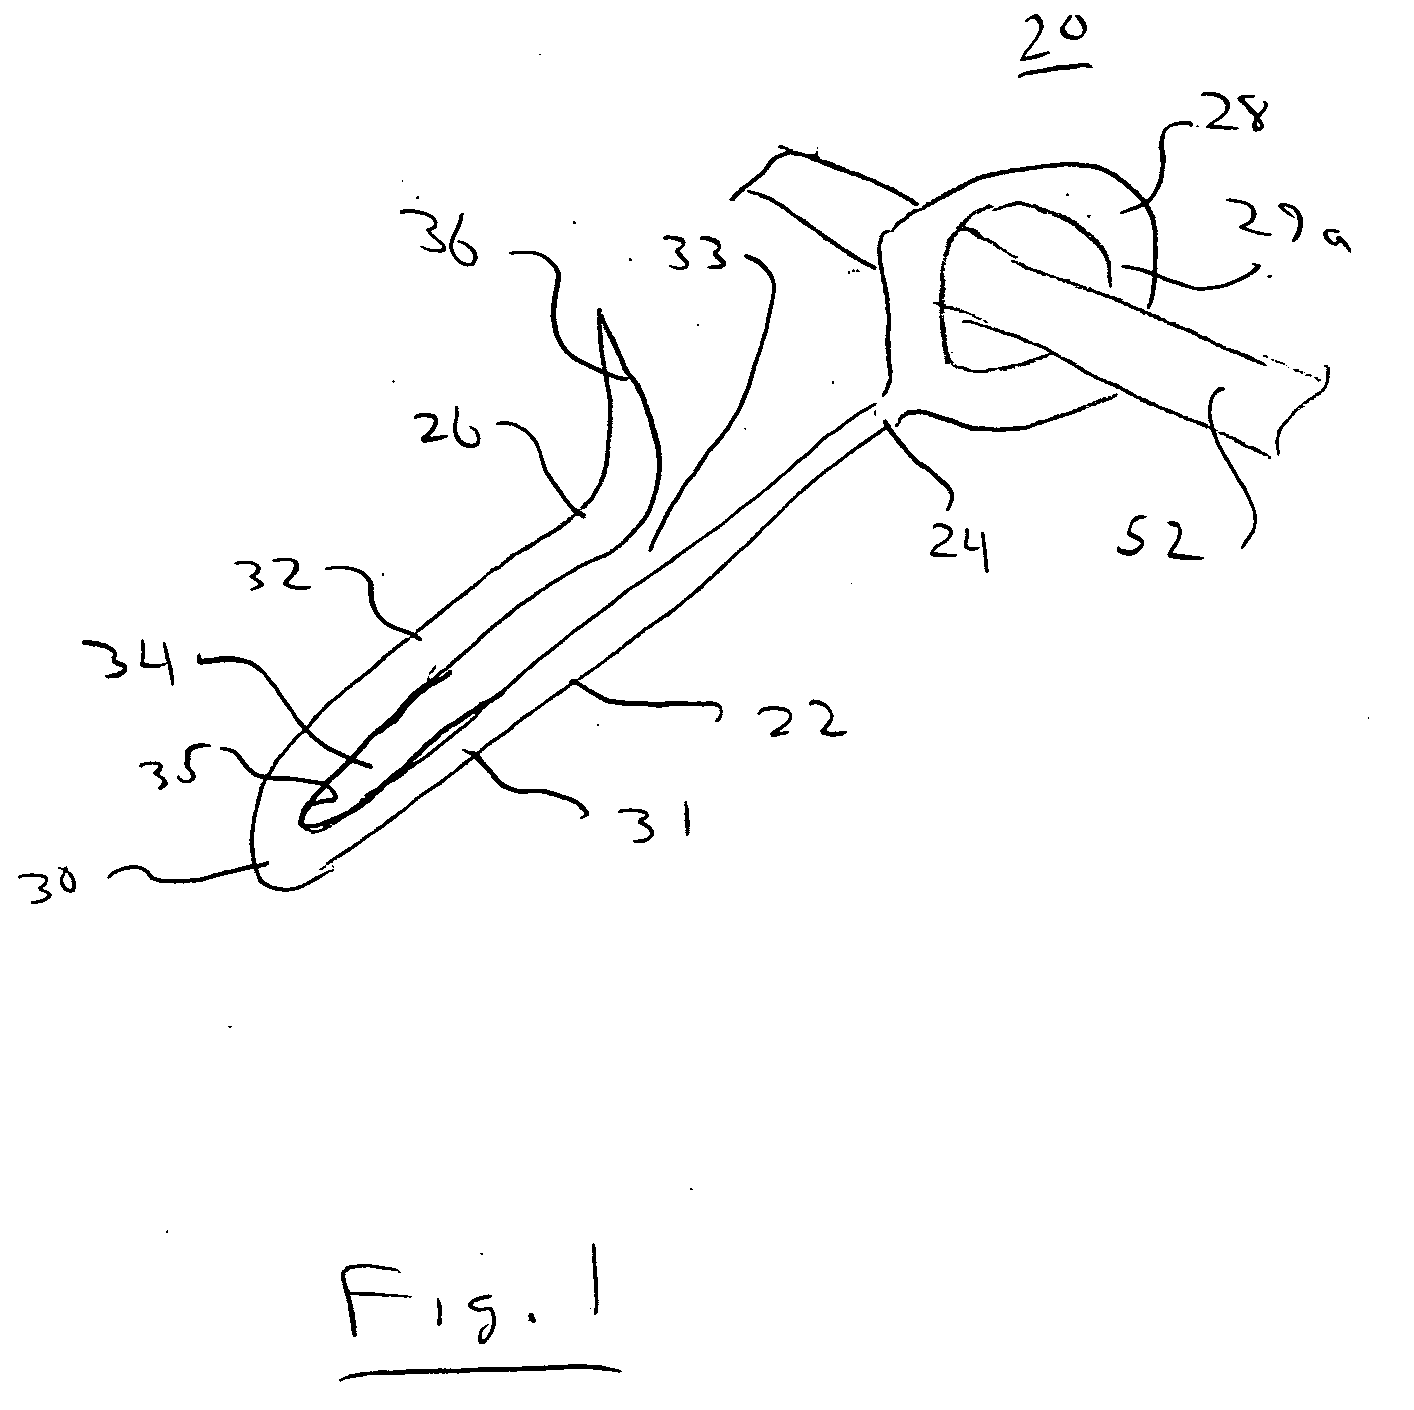 System and method for harvesting grape clusters